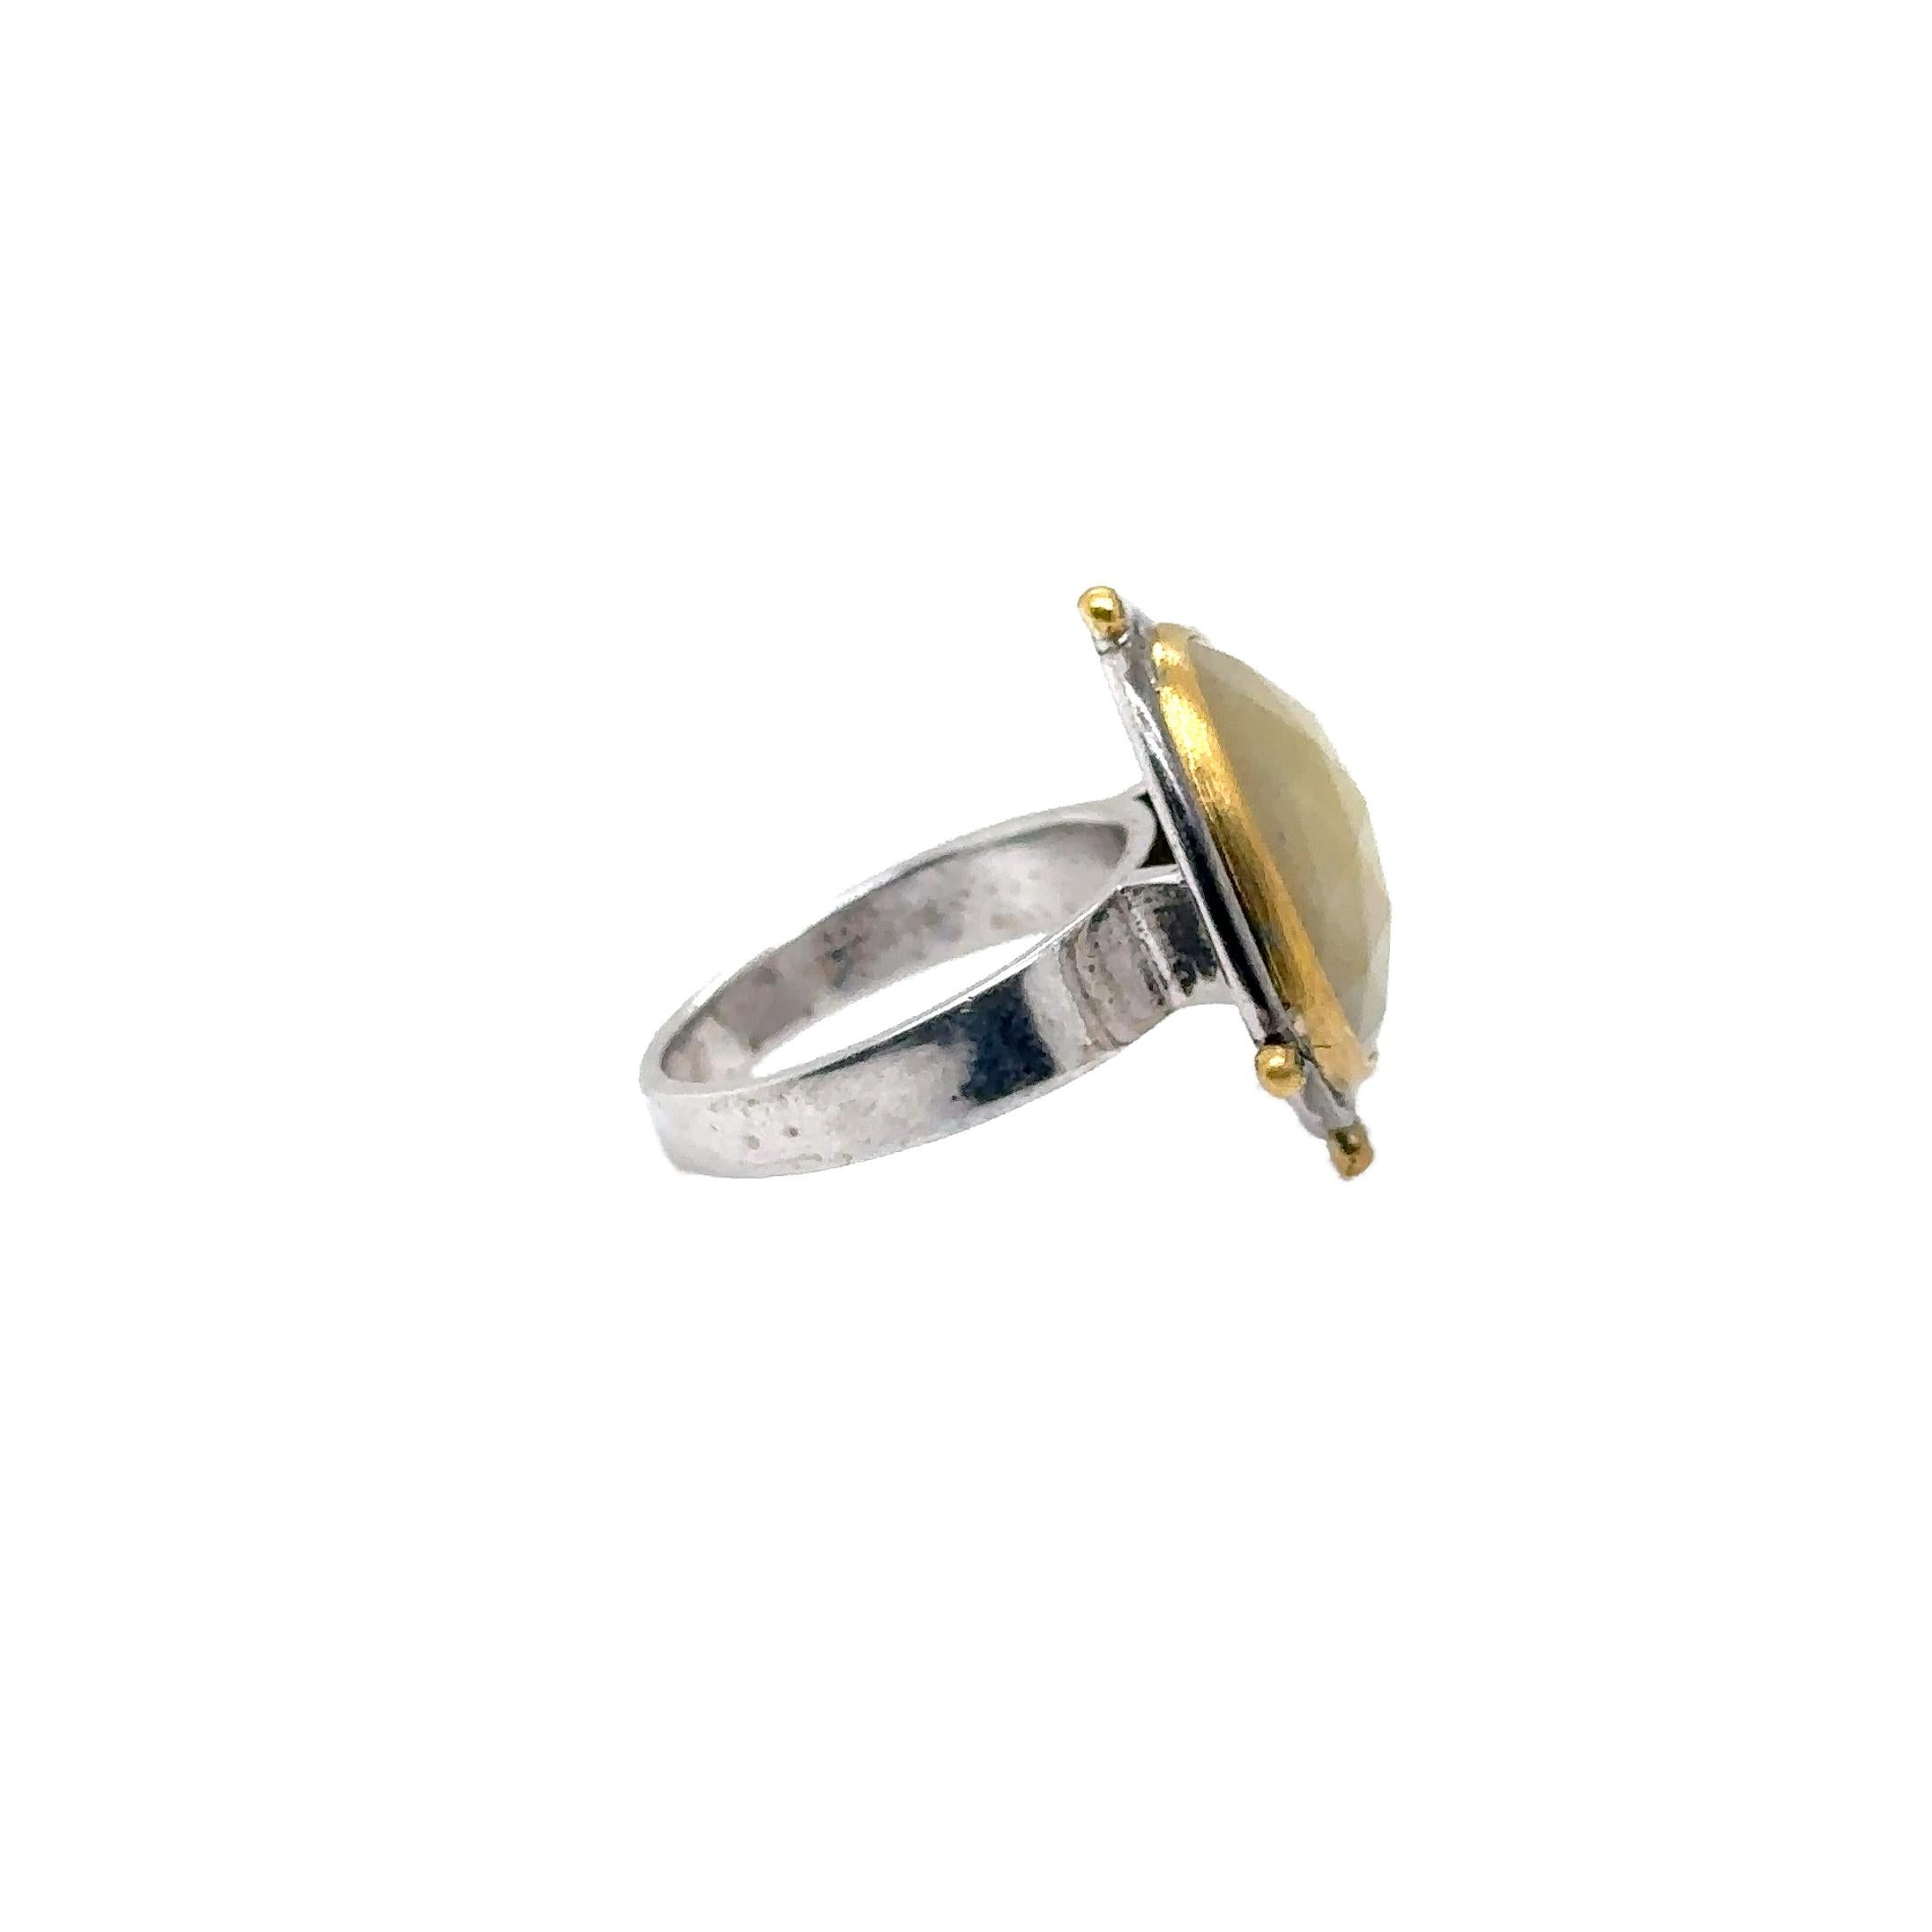 JAS-19-1835 - 24K/SS HANDMADE RING w CHROME DIOPSIDES & NATURAL YELLOW SAPPHIRE For Sale 3